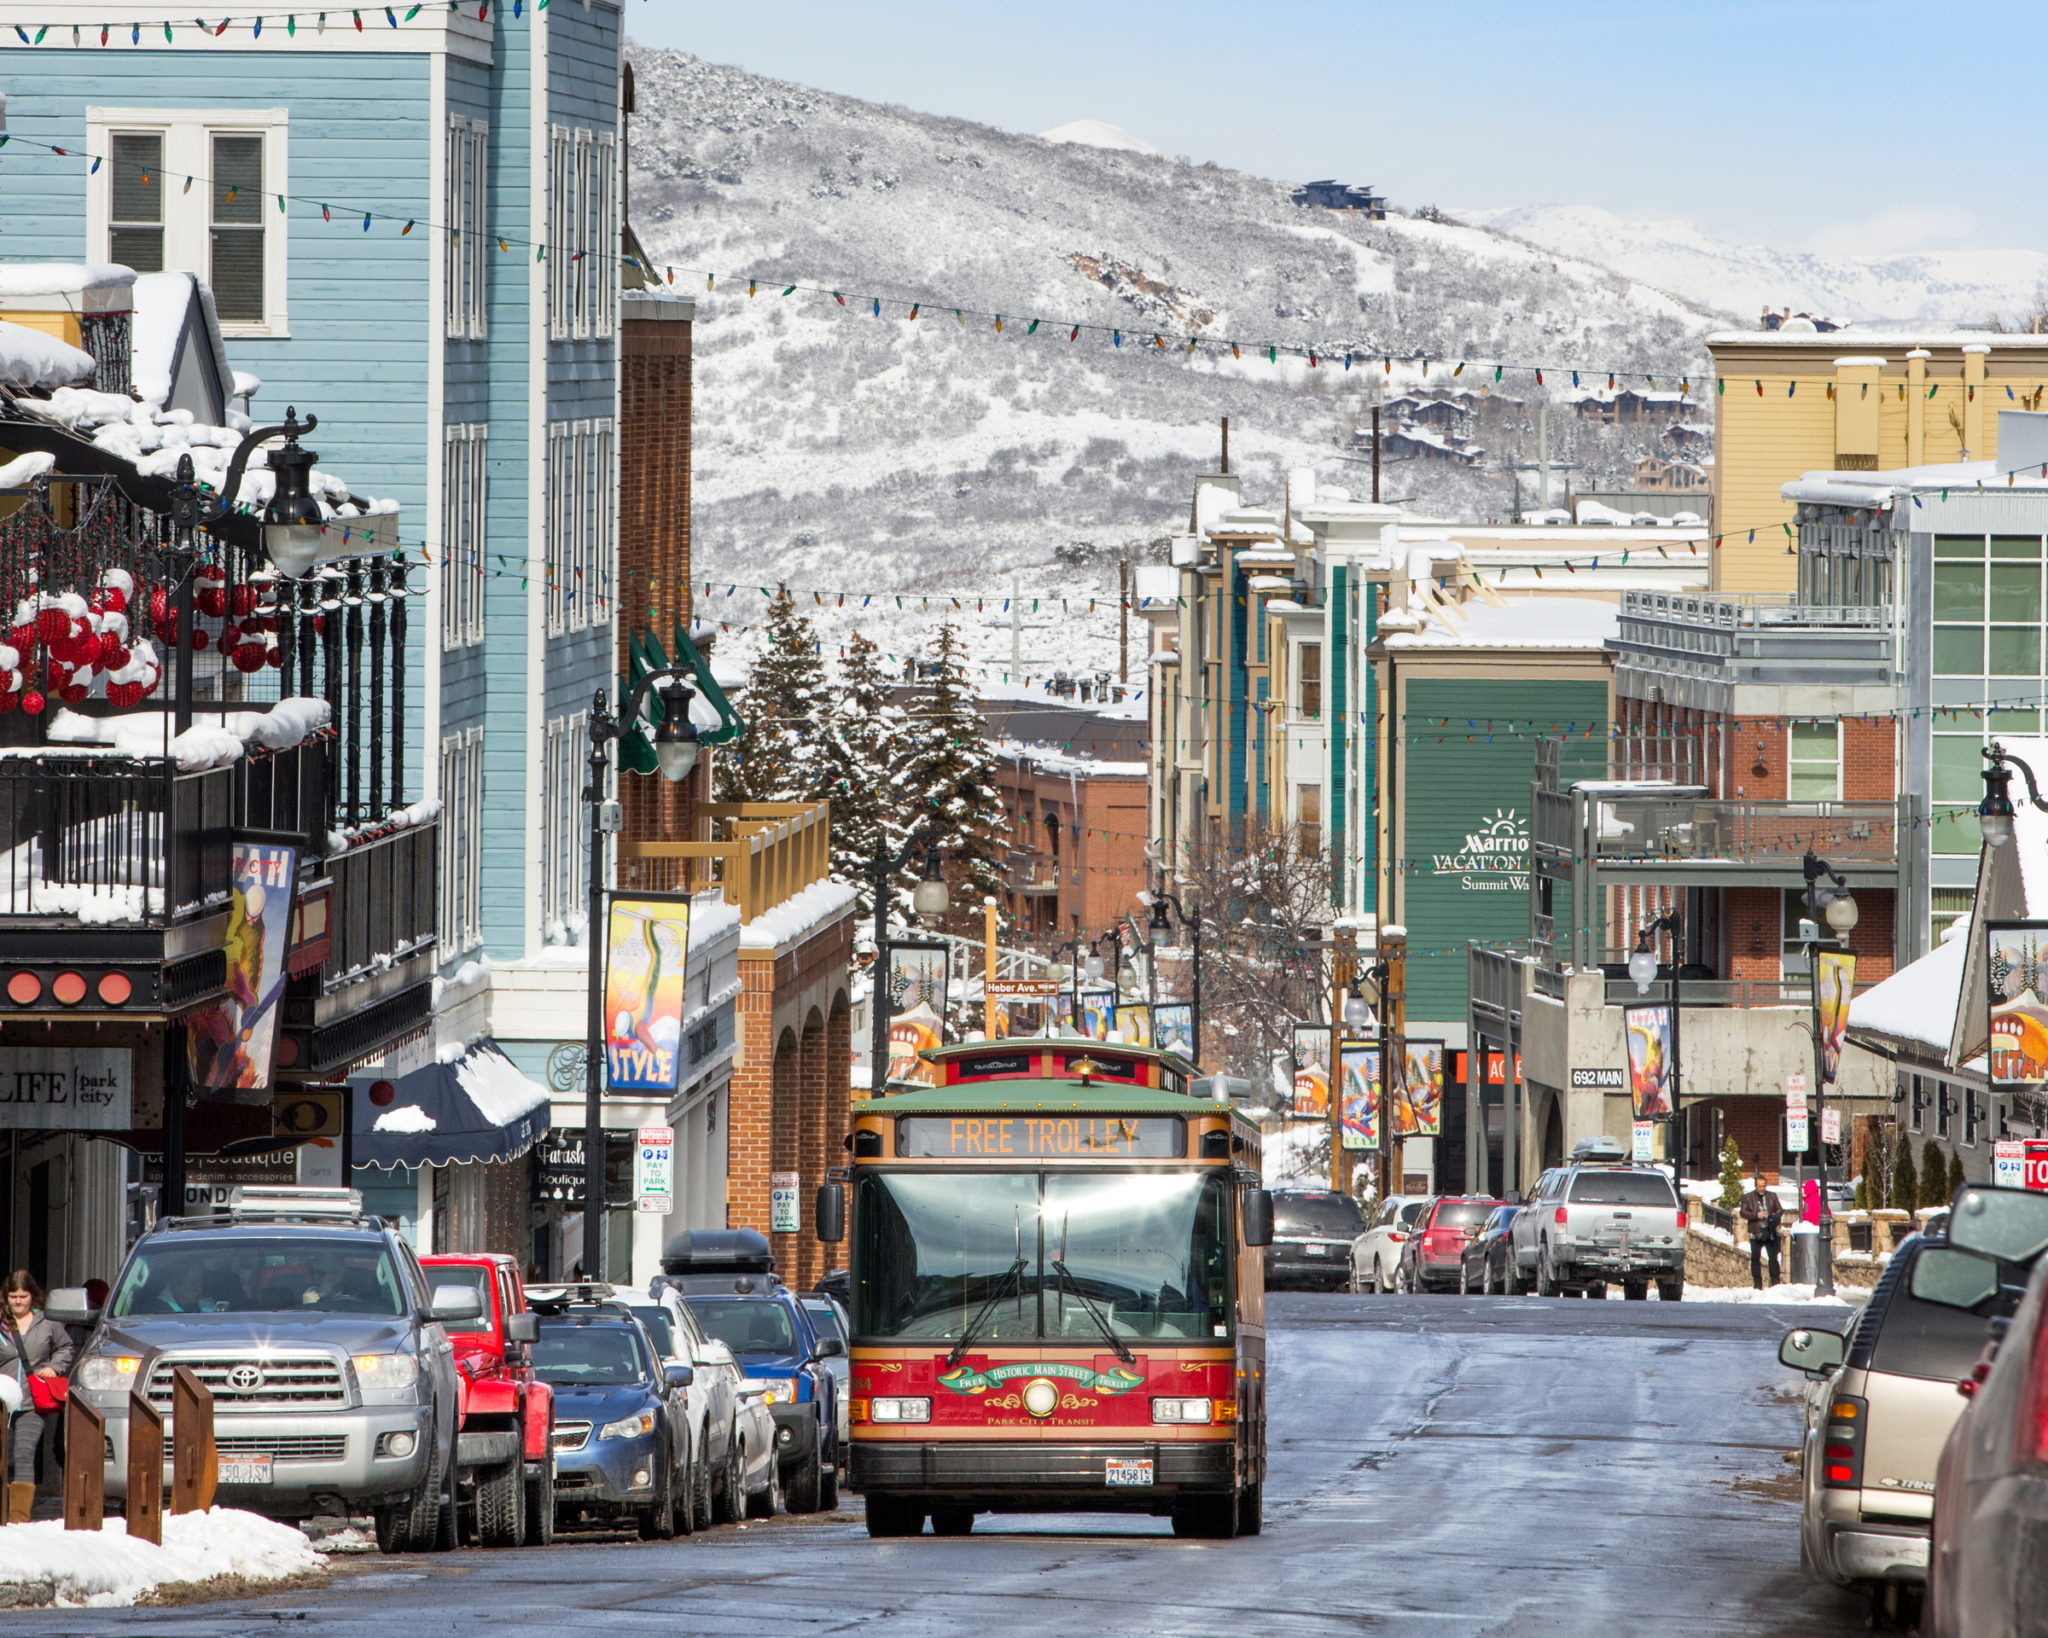 Visit Park City Utah Skiing Luxury Dining Spas Hotels Deer Valley Sundance Film Festival IKON Pass EPIC Pass Woodward Park City fly fishing ice castles Stand Up Paddleboard Homestead Crater 2020 holiday season Christmas New Years